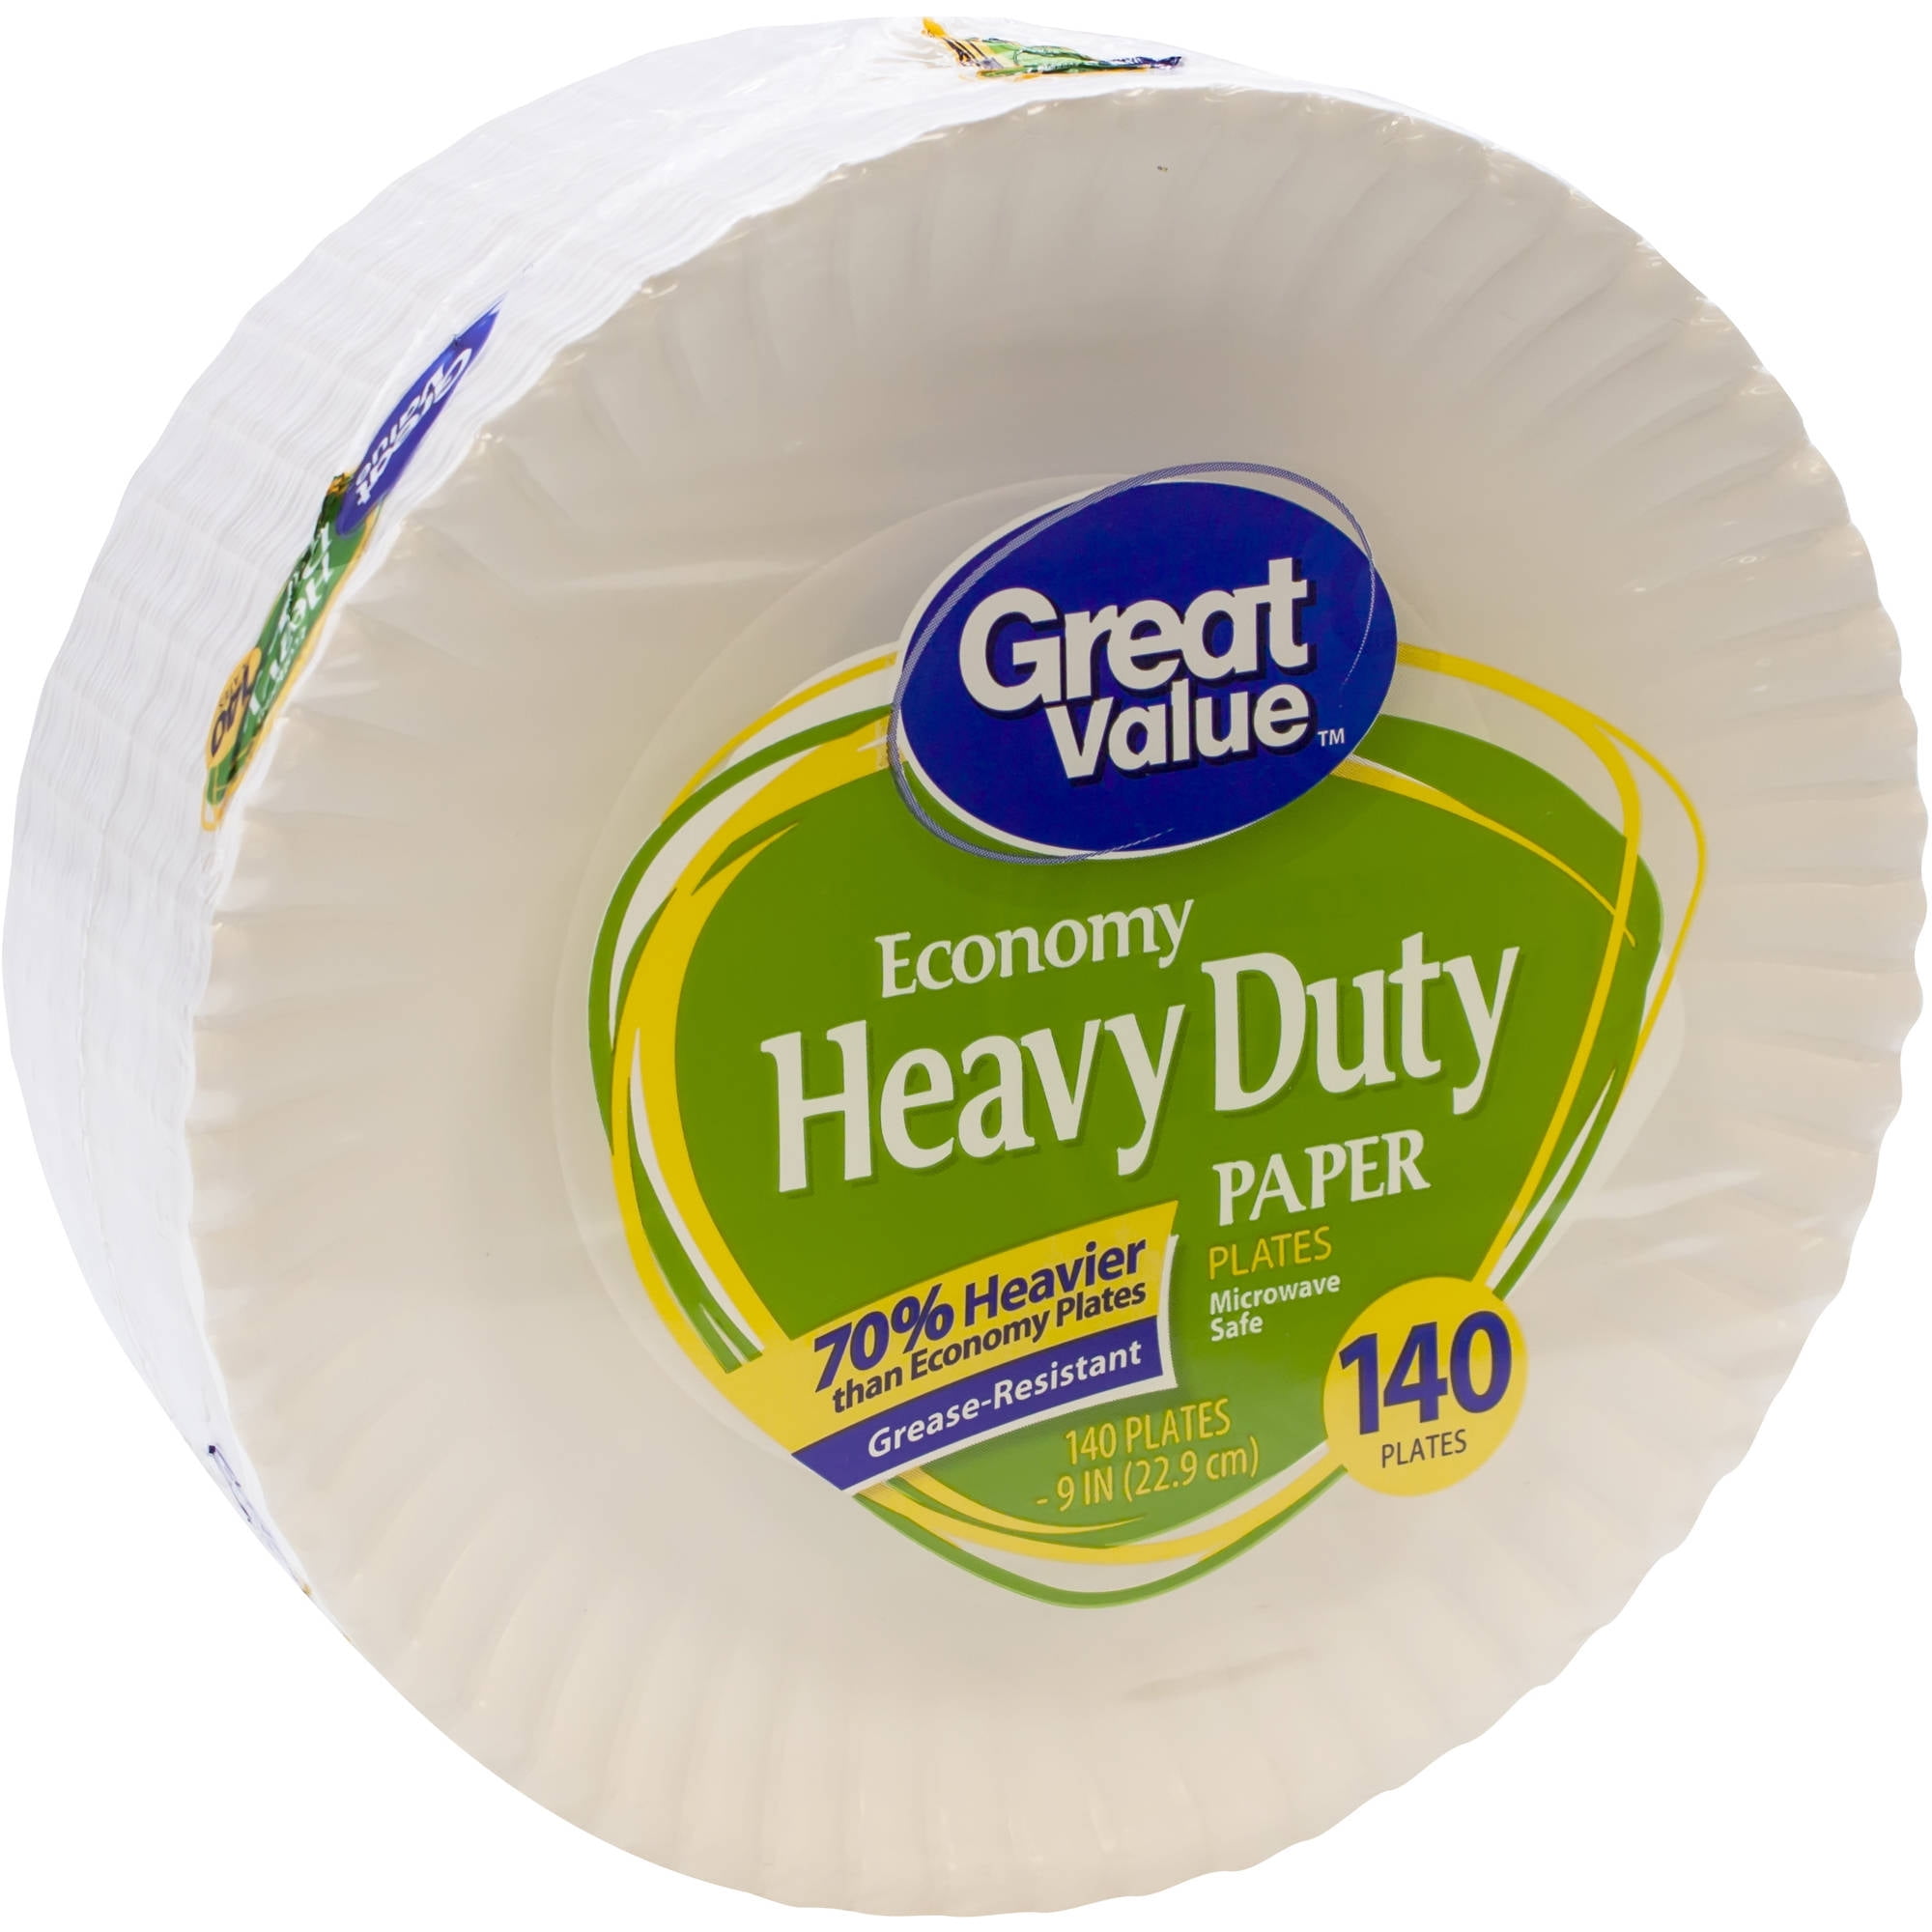 Great Value Economy Heavy Duty Paper Plates, 140 count